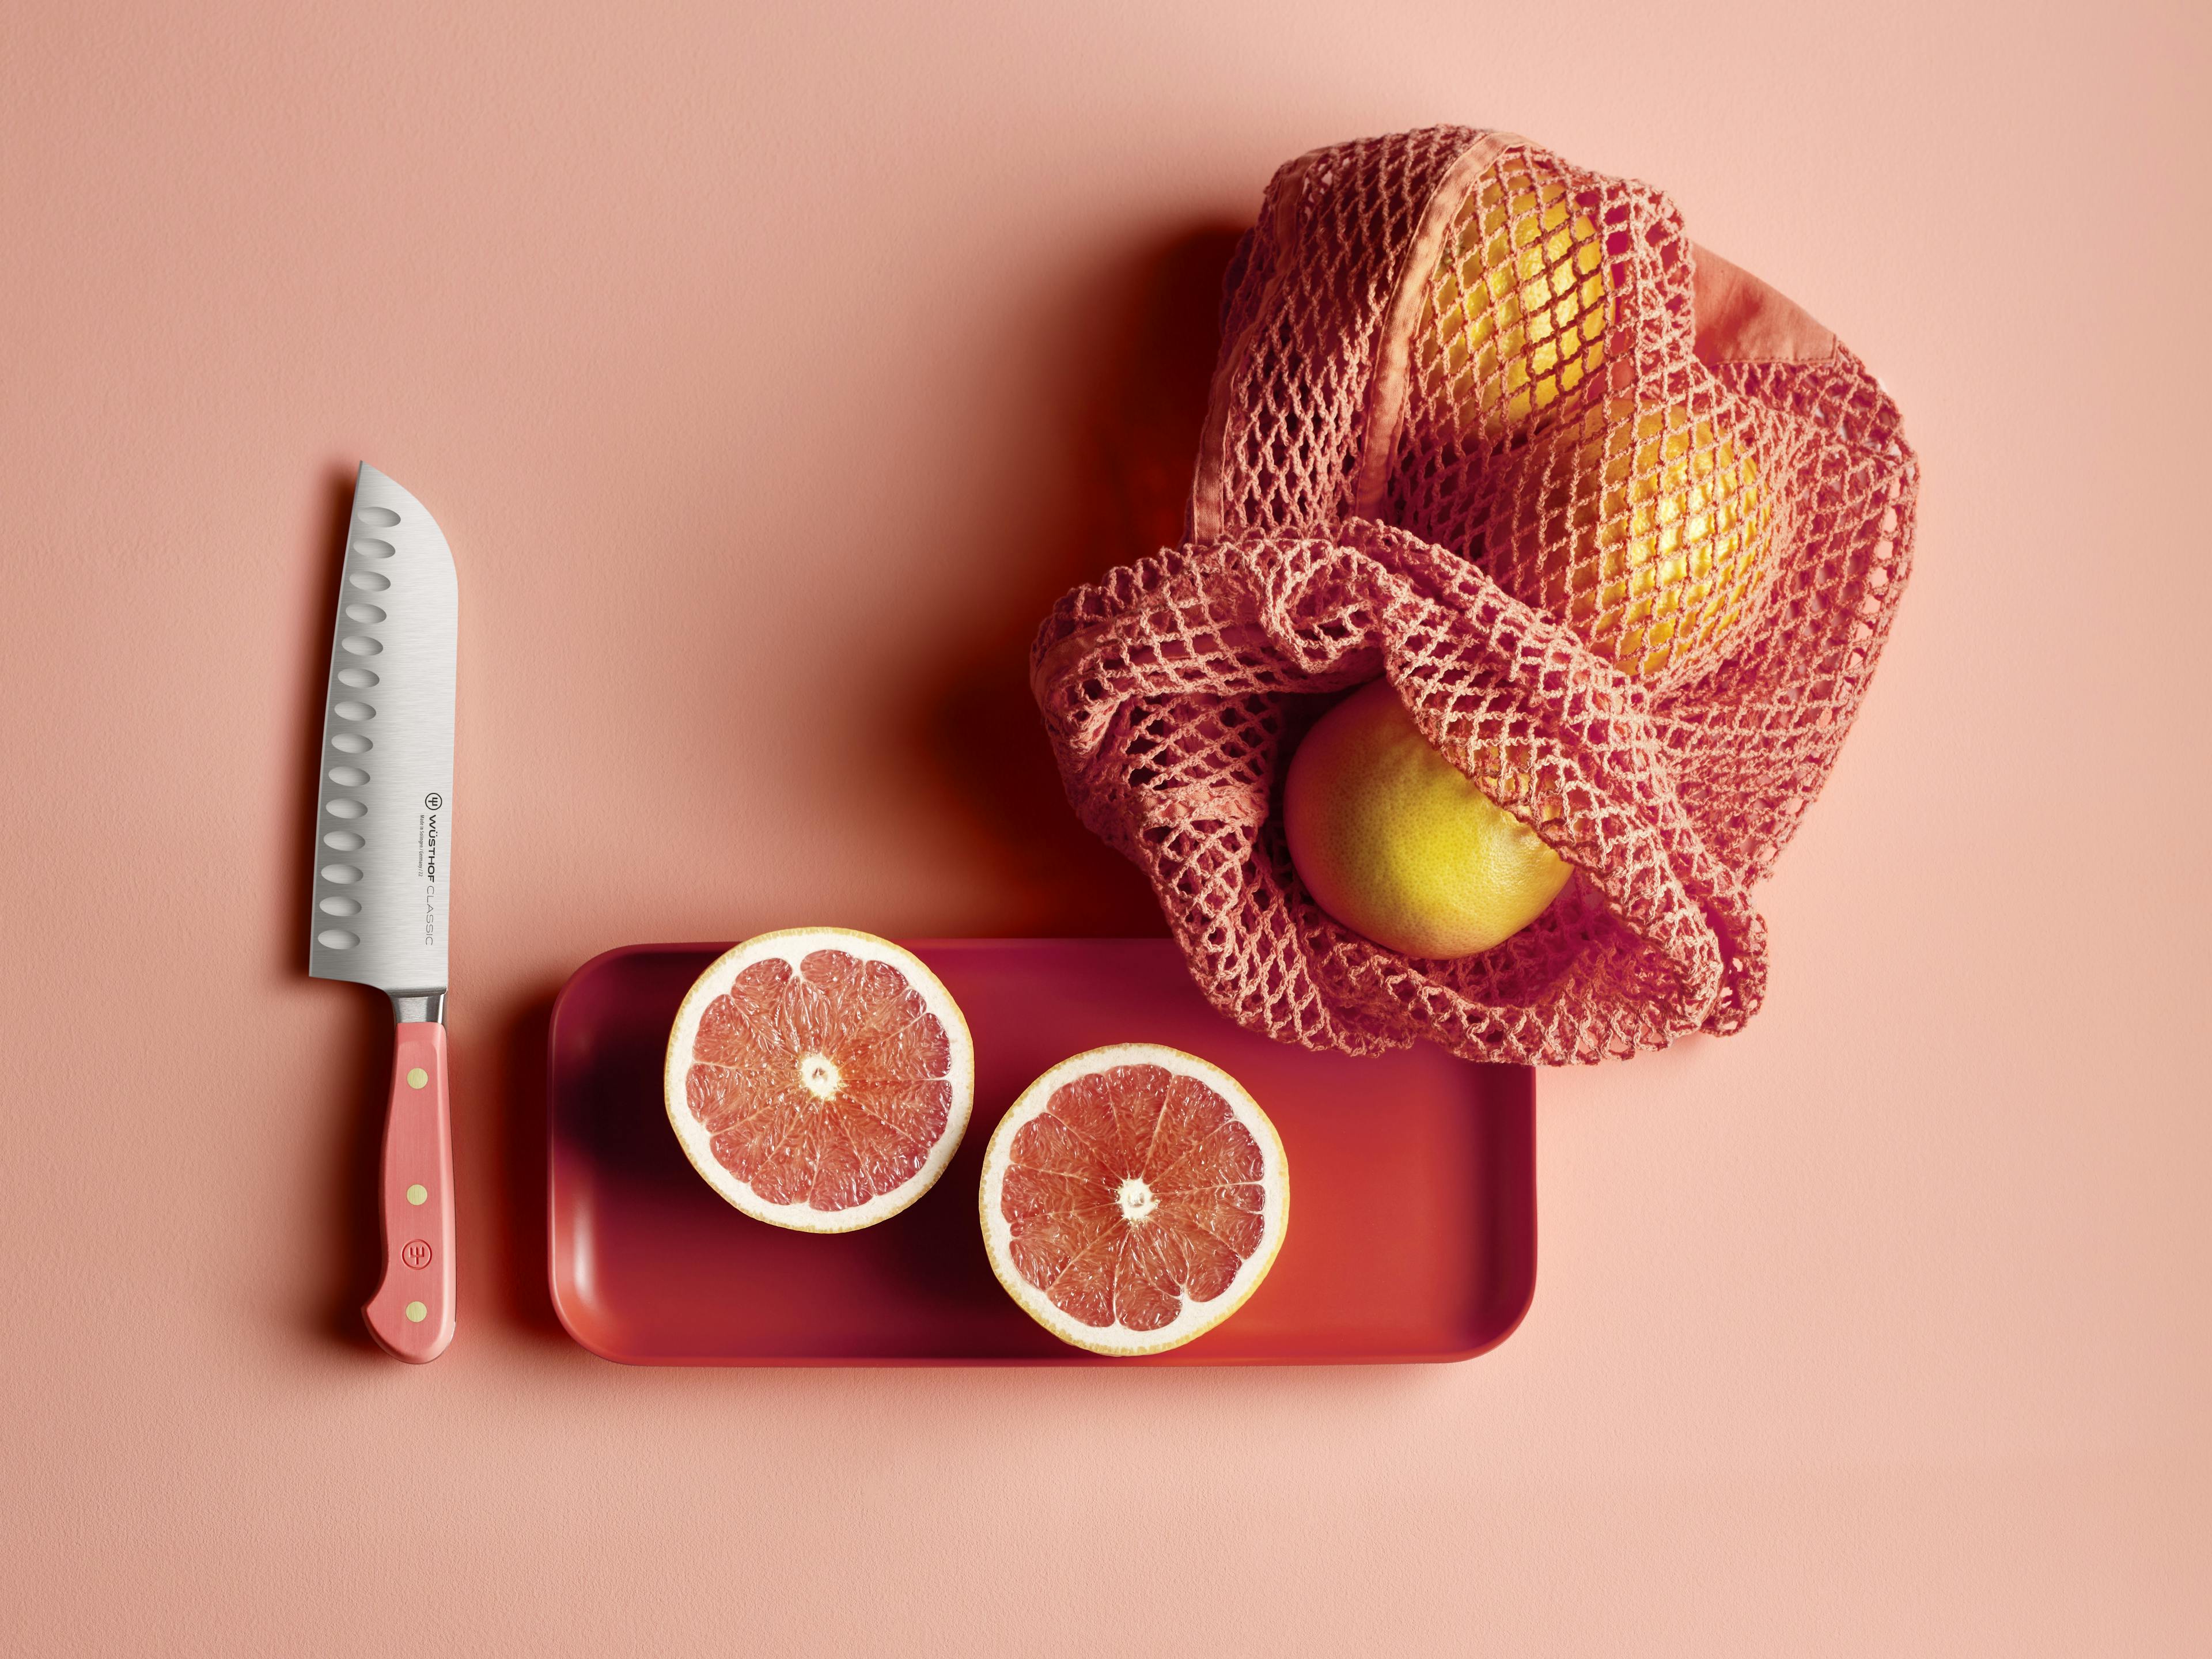 Coral peach hollow edge santoku near vibrant fruit and netted bag